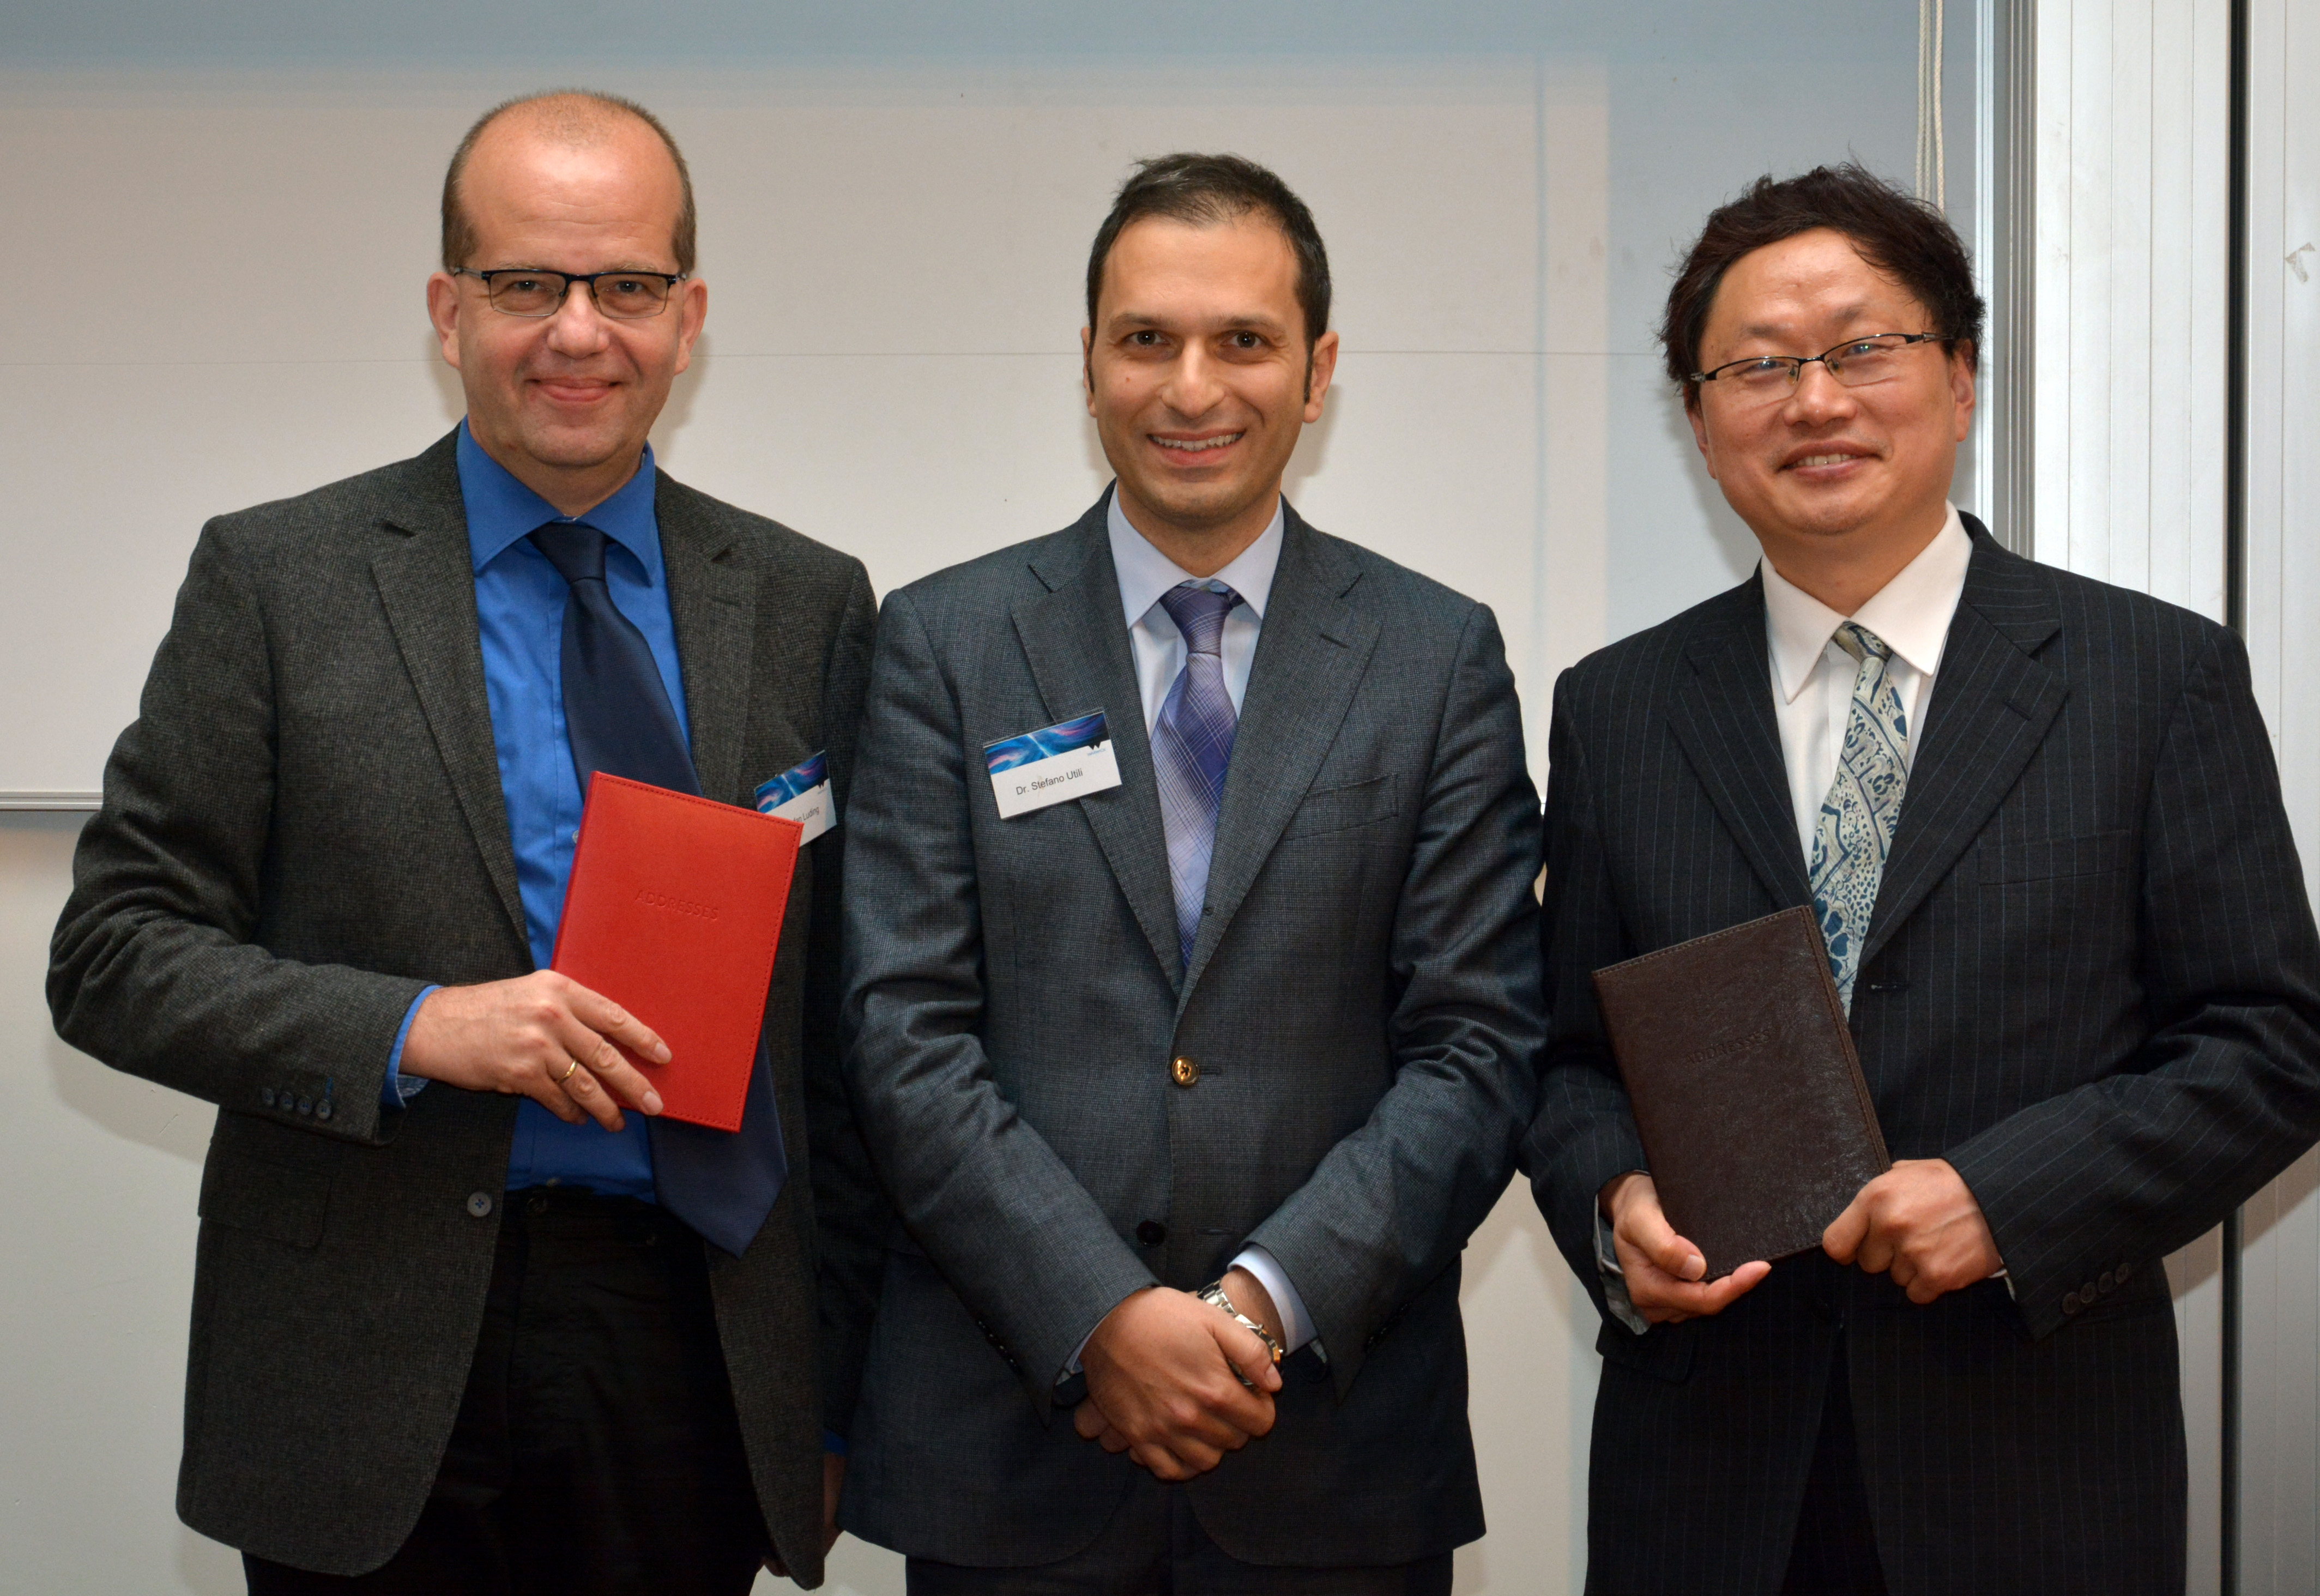 Prof. Stefan Luding and Prof. Mingjing Jiang receiving their gift for their participation from Dr Stefano Utili